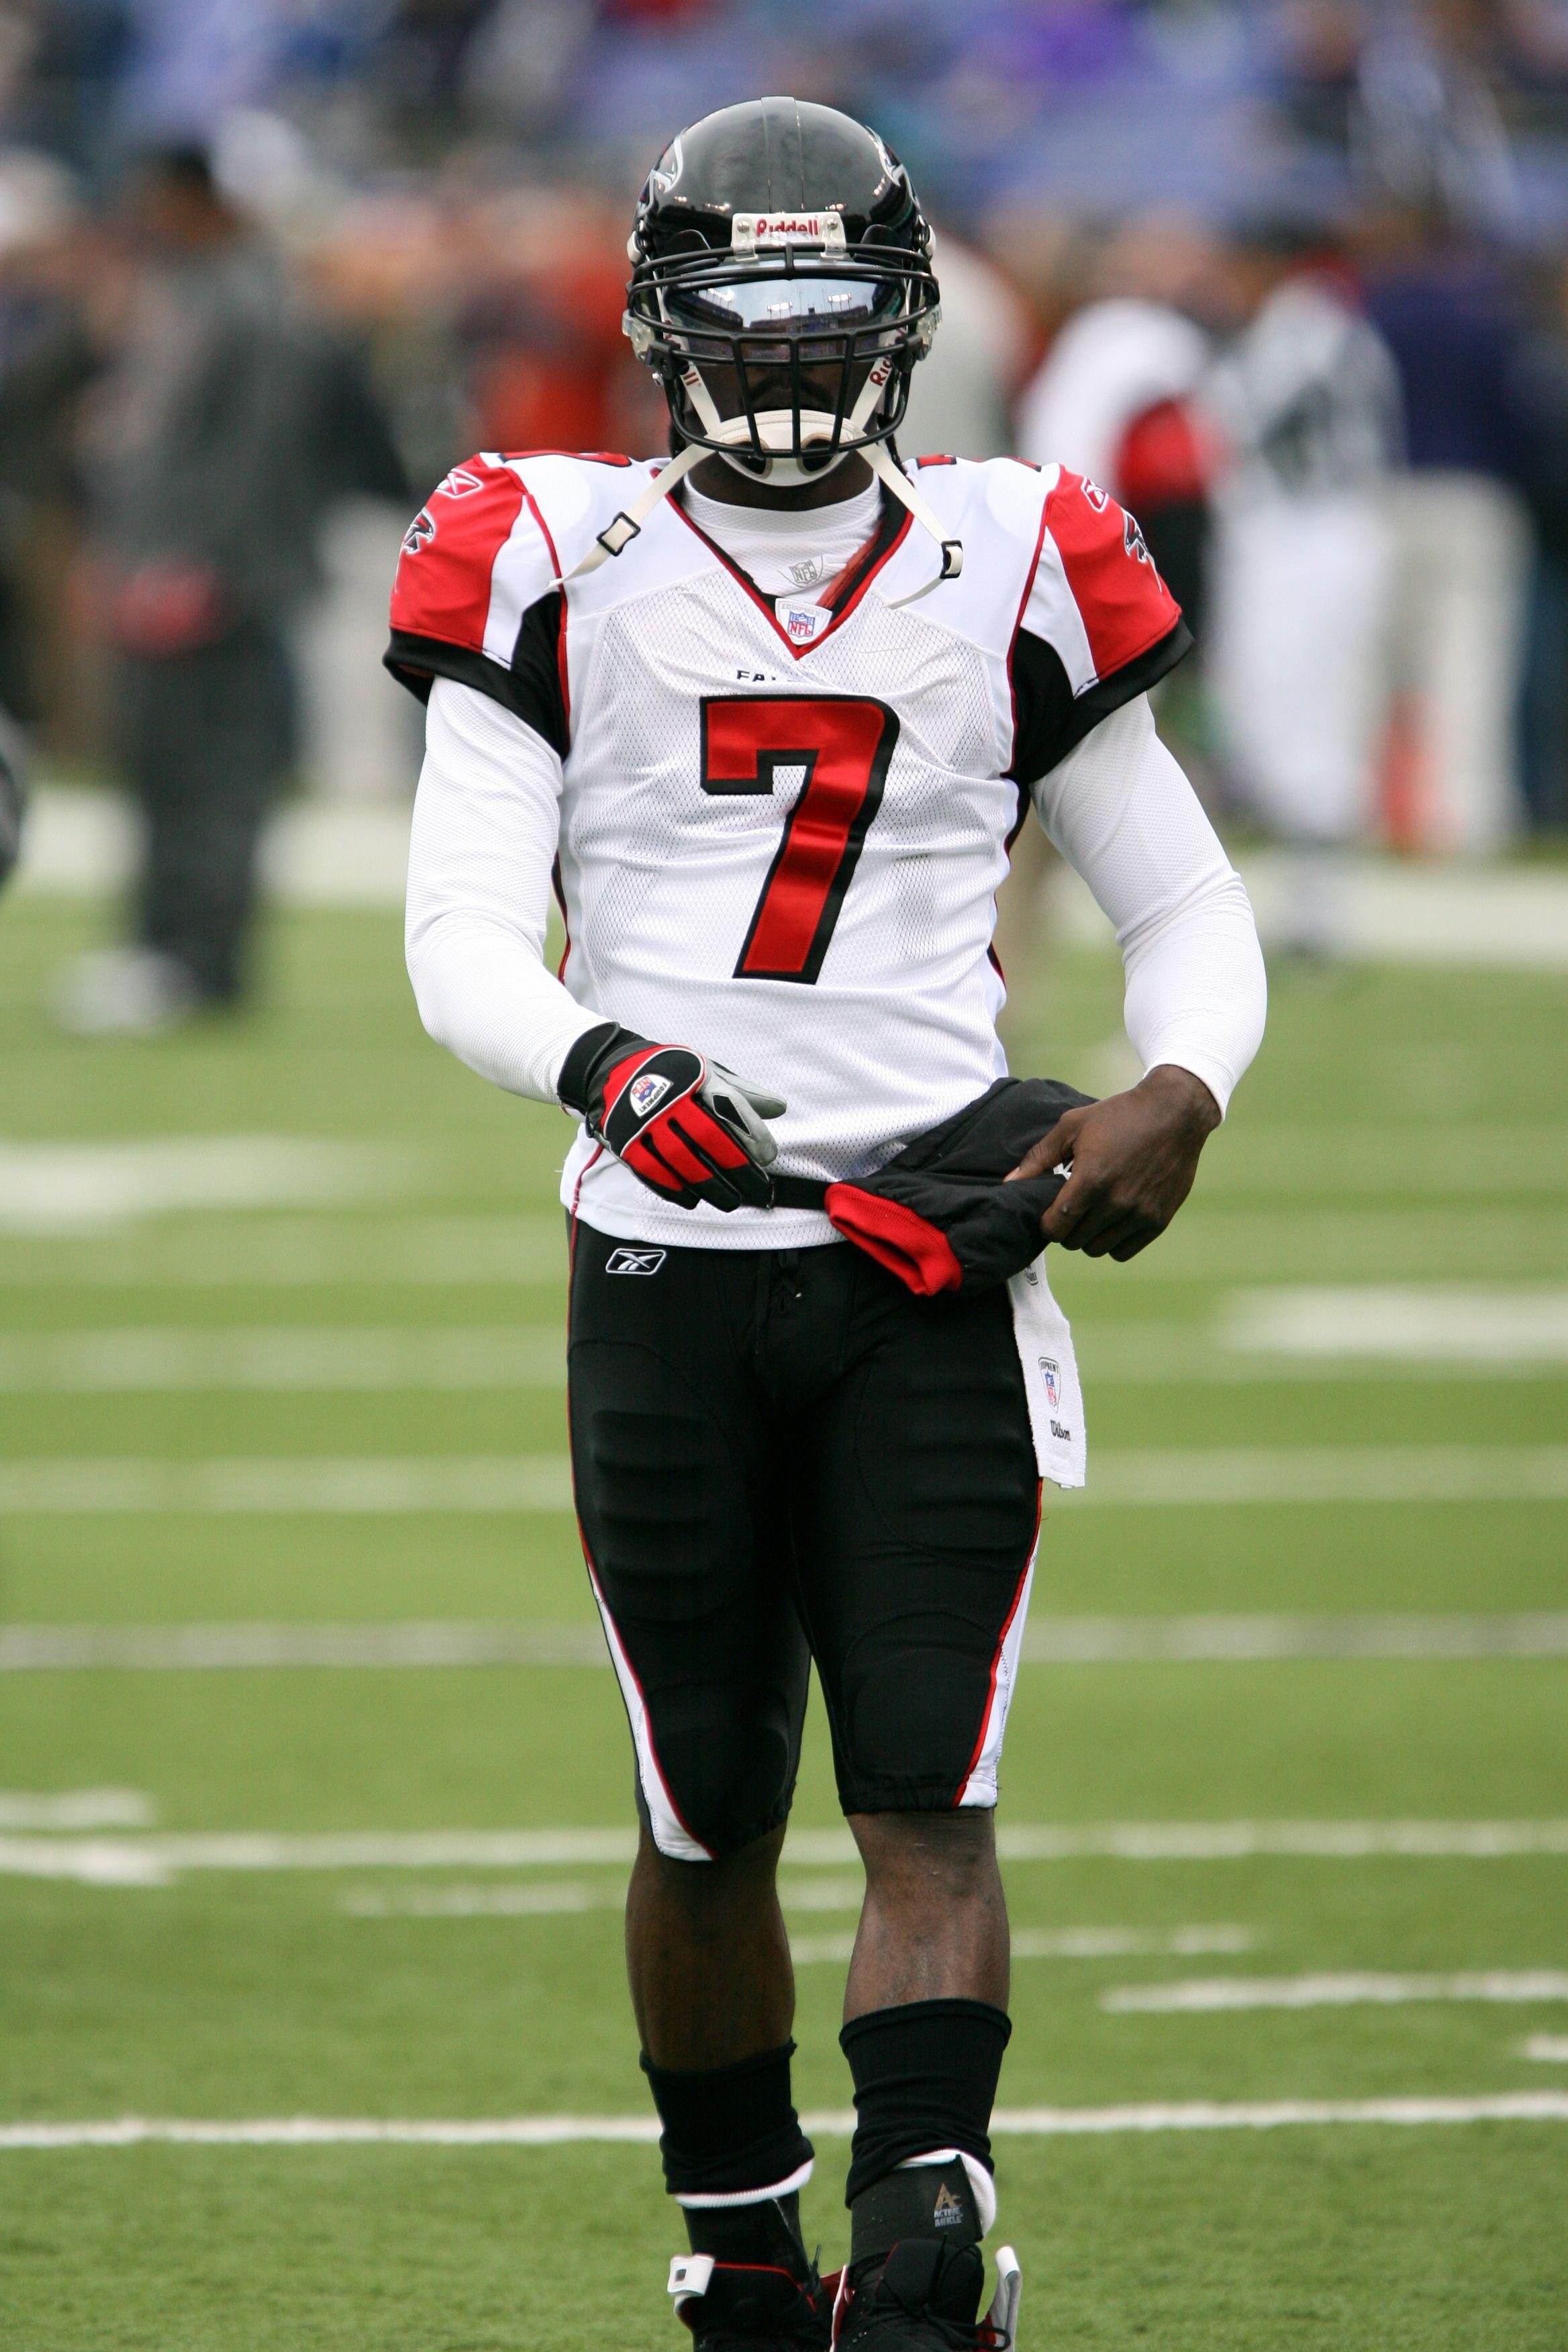 SportsBlog - From the Obstructed Seats - Michael Vick, A Look Back